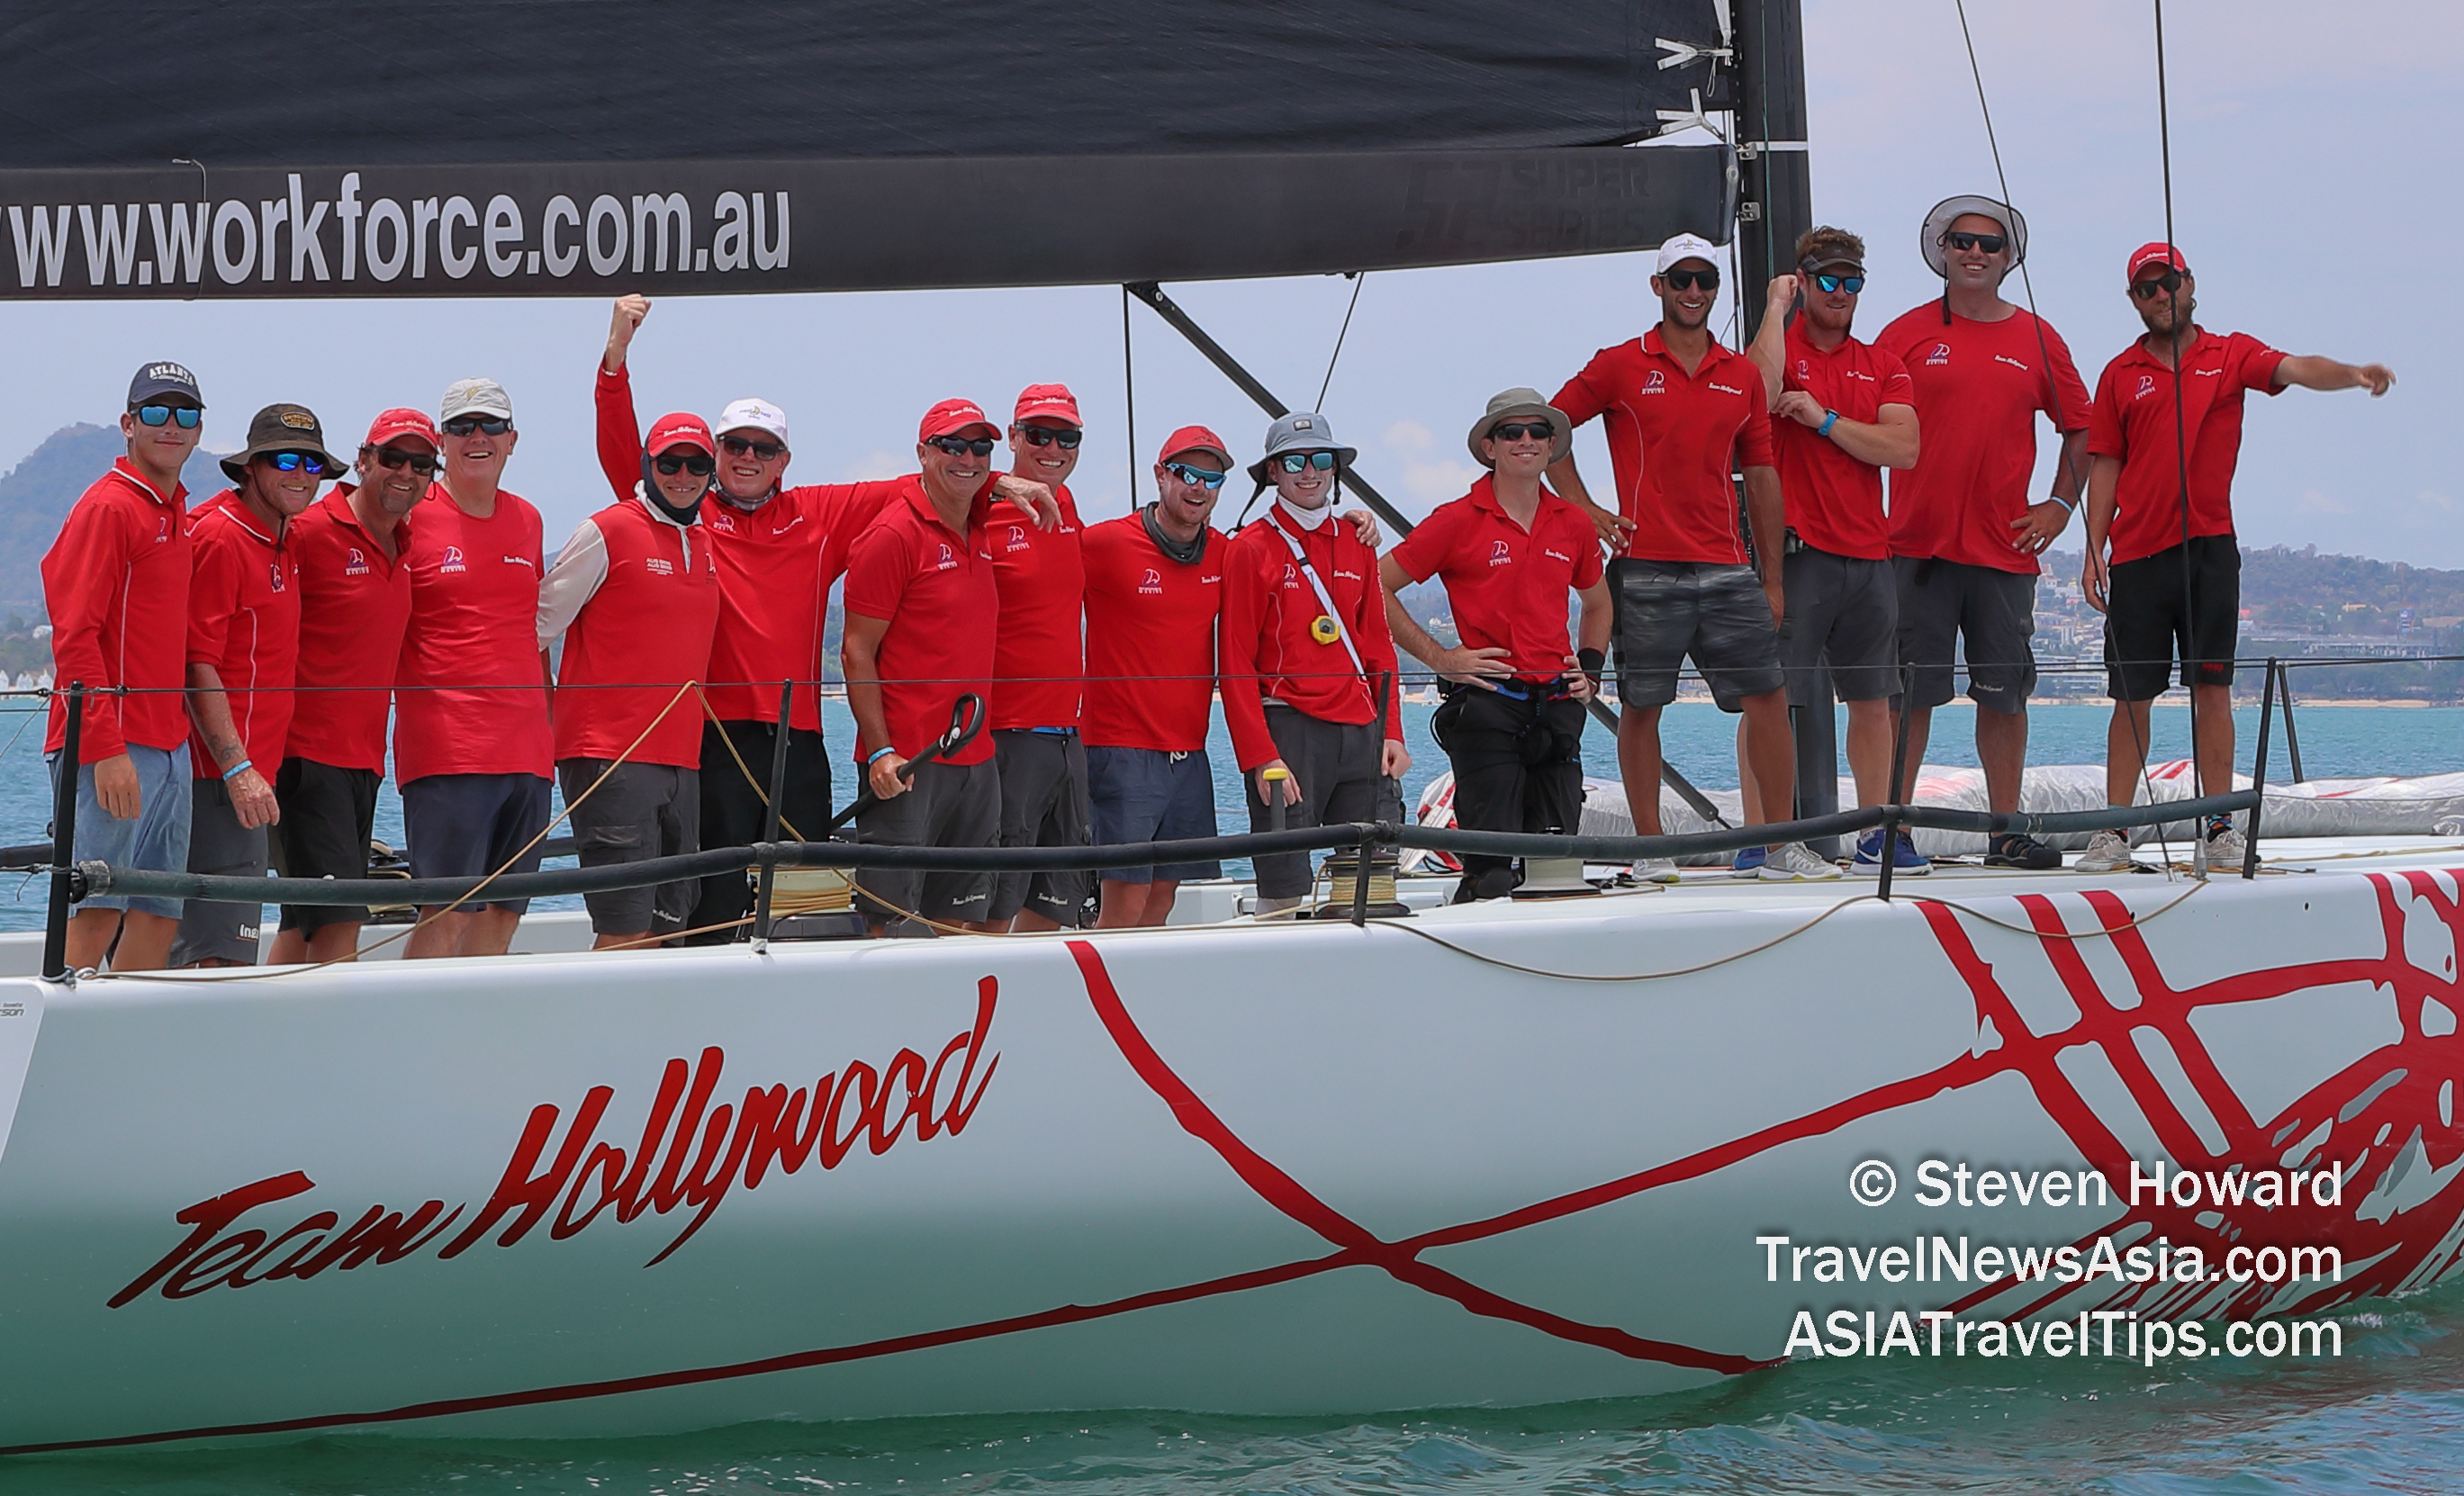 Ray Roberts and his talented crew onboard Team Hollywood proved impossible to beat at the Top of the Gulf Regatta in Pattaya in May. Picture by Steven Howard of TravelNewsAsia.com Click to enlarge.